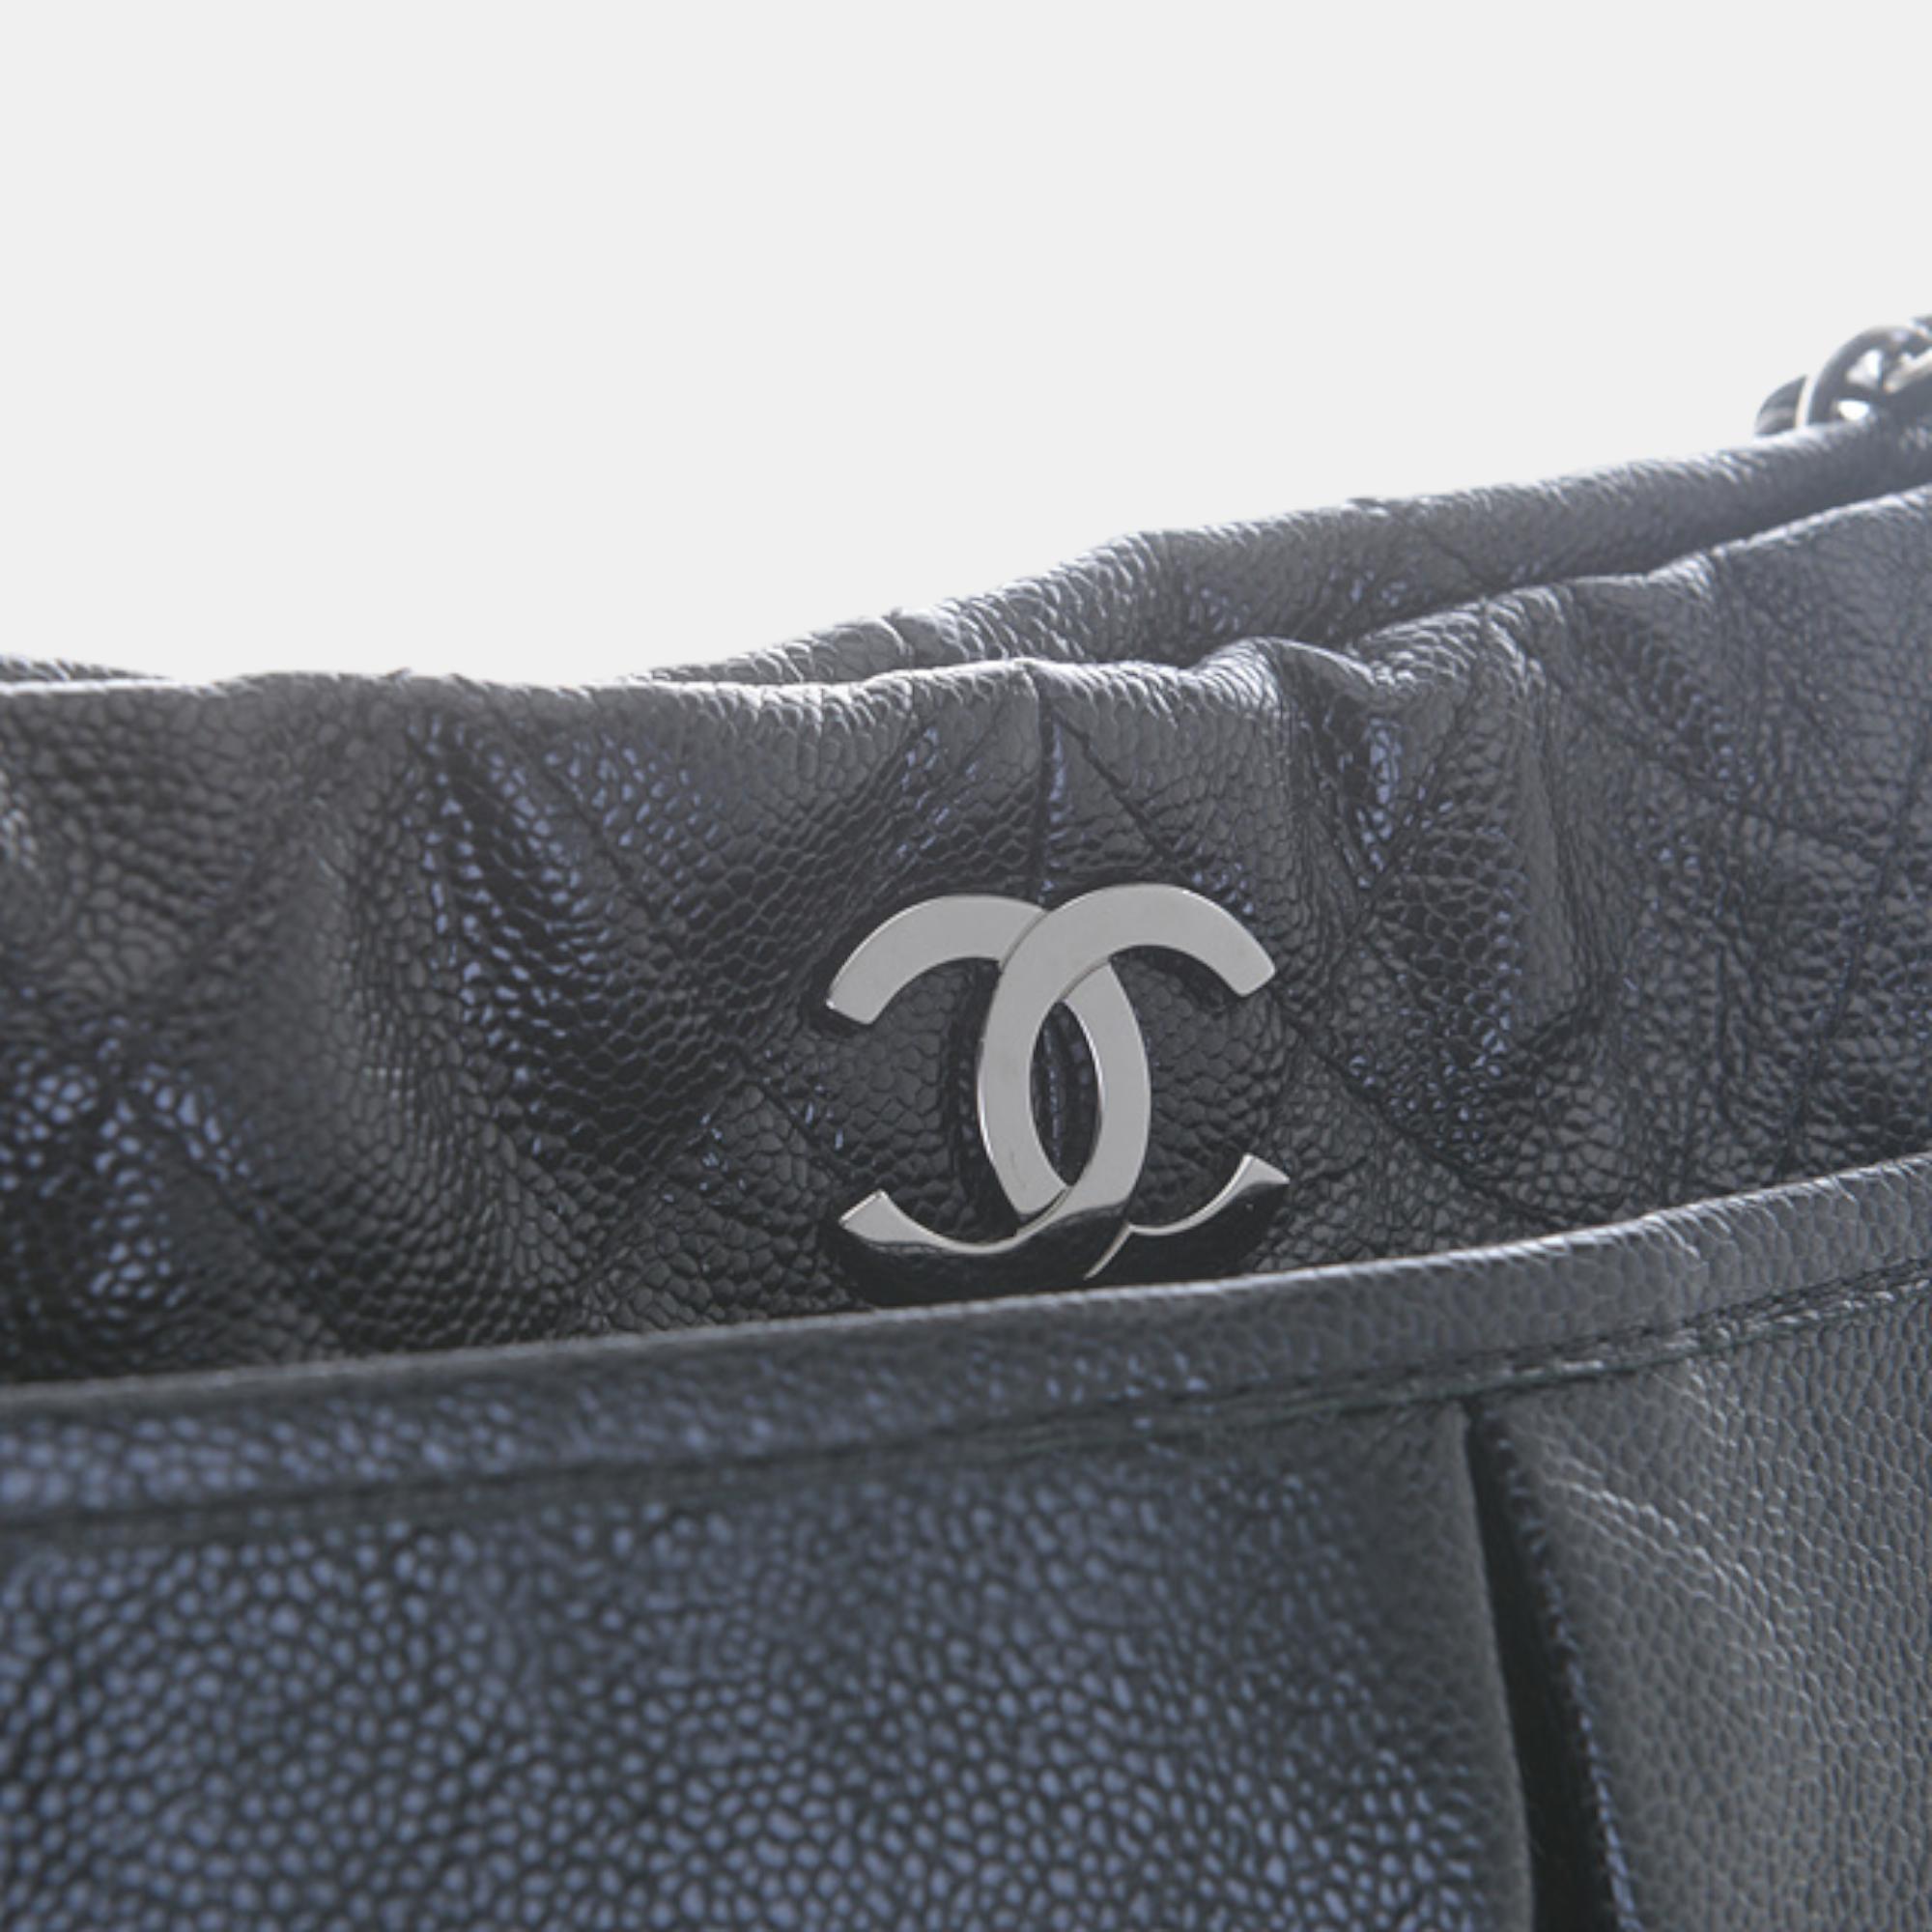 Chanel Black Leather Natural Beauty Tote Bag